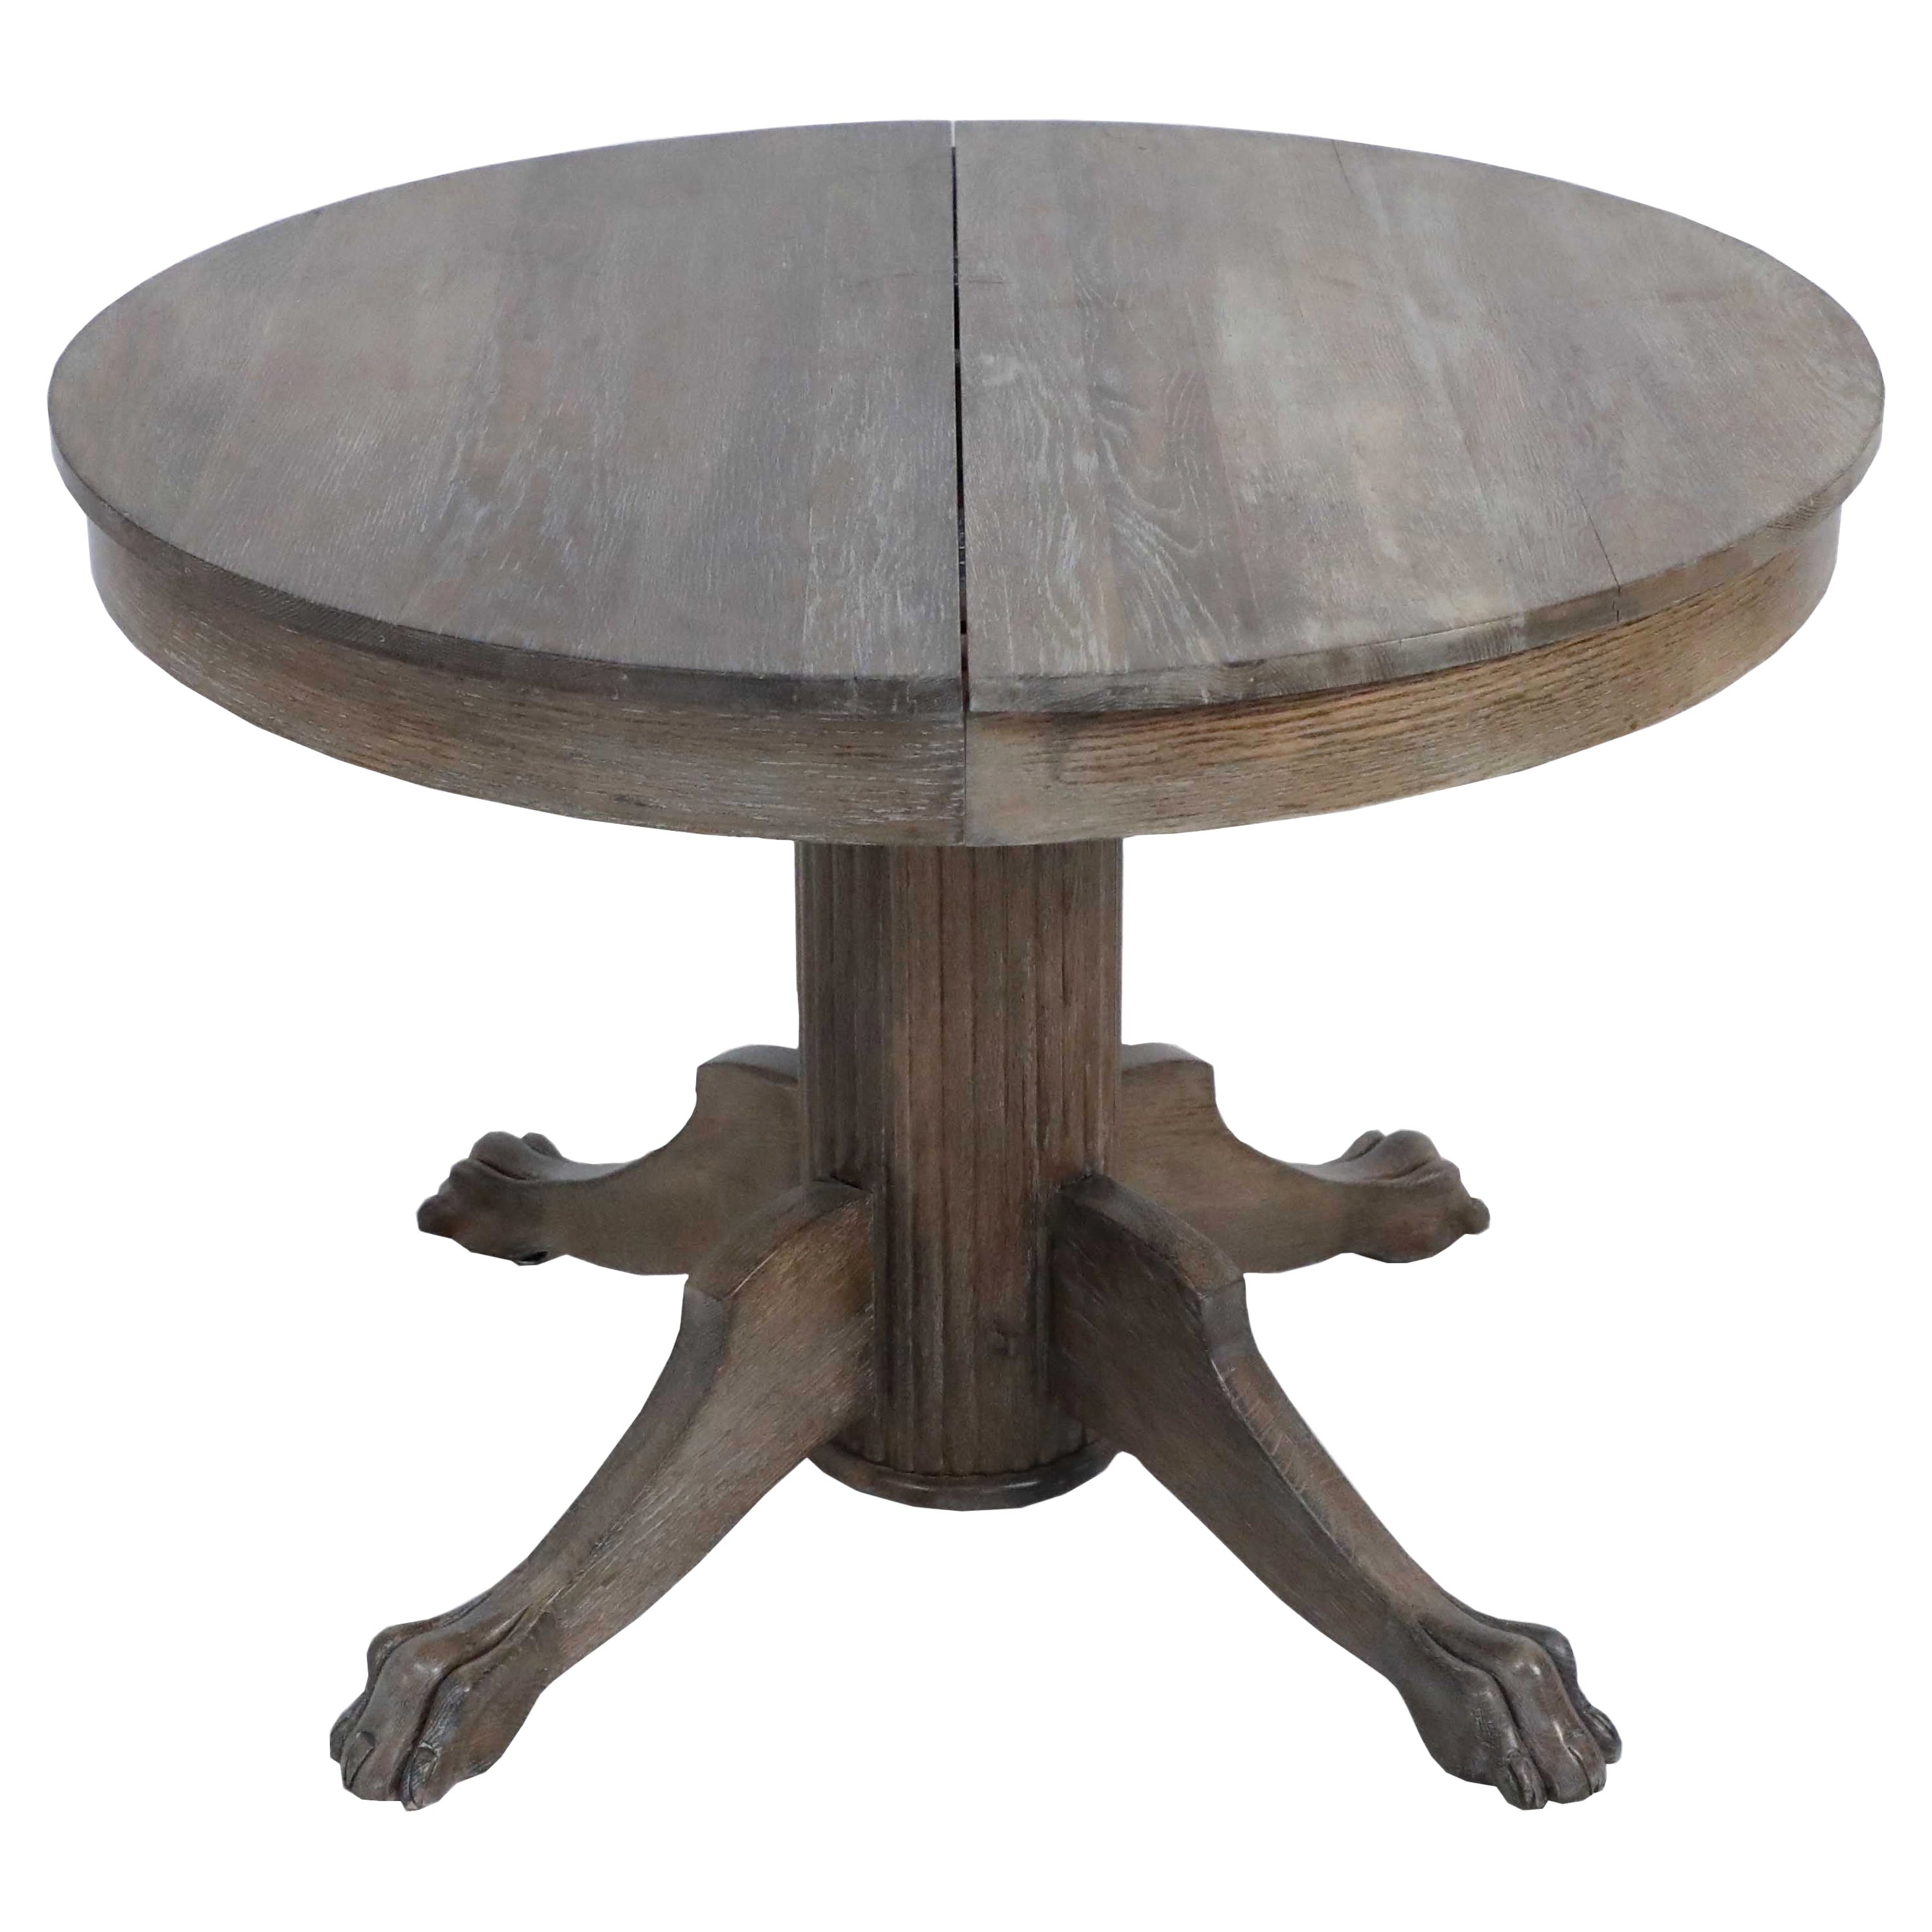 English Edwardian Cerused Oak Circular Claw Foot Center/Dining Table with Leaves For Sale